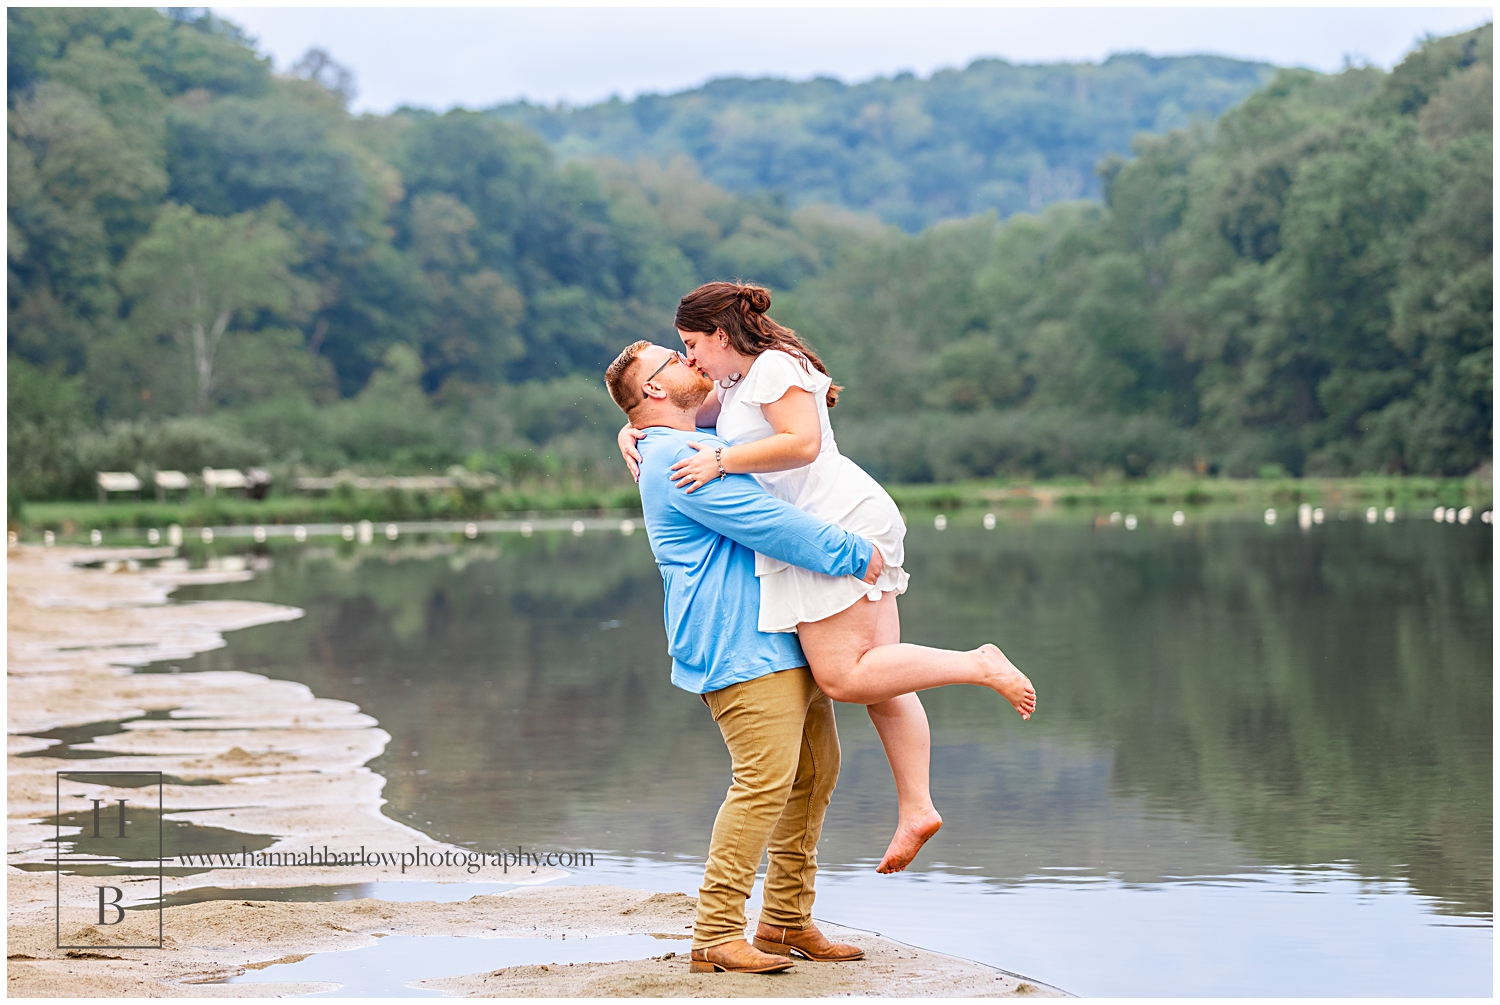 Man in blue shirt holds fiancé in white dress up in the air for a kiss.